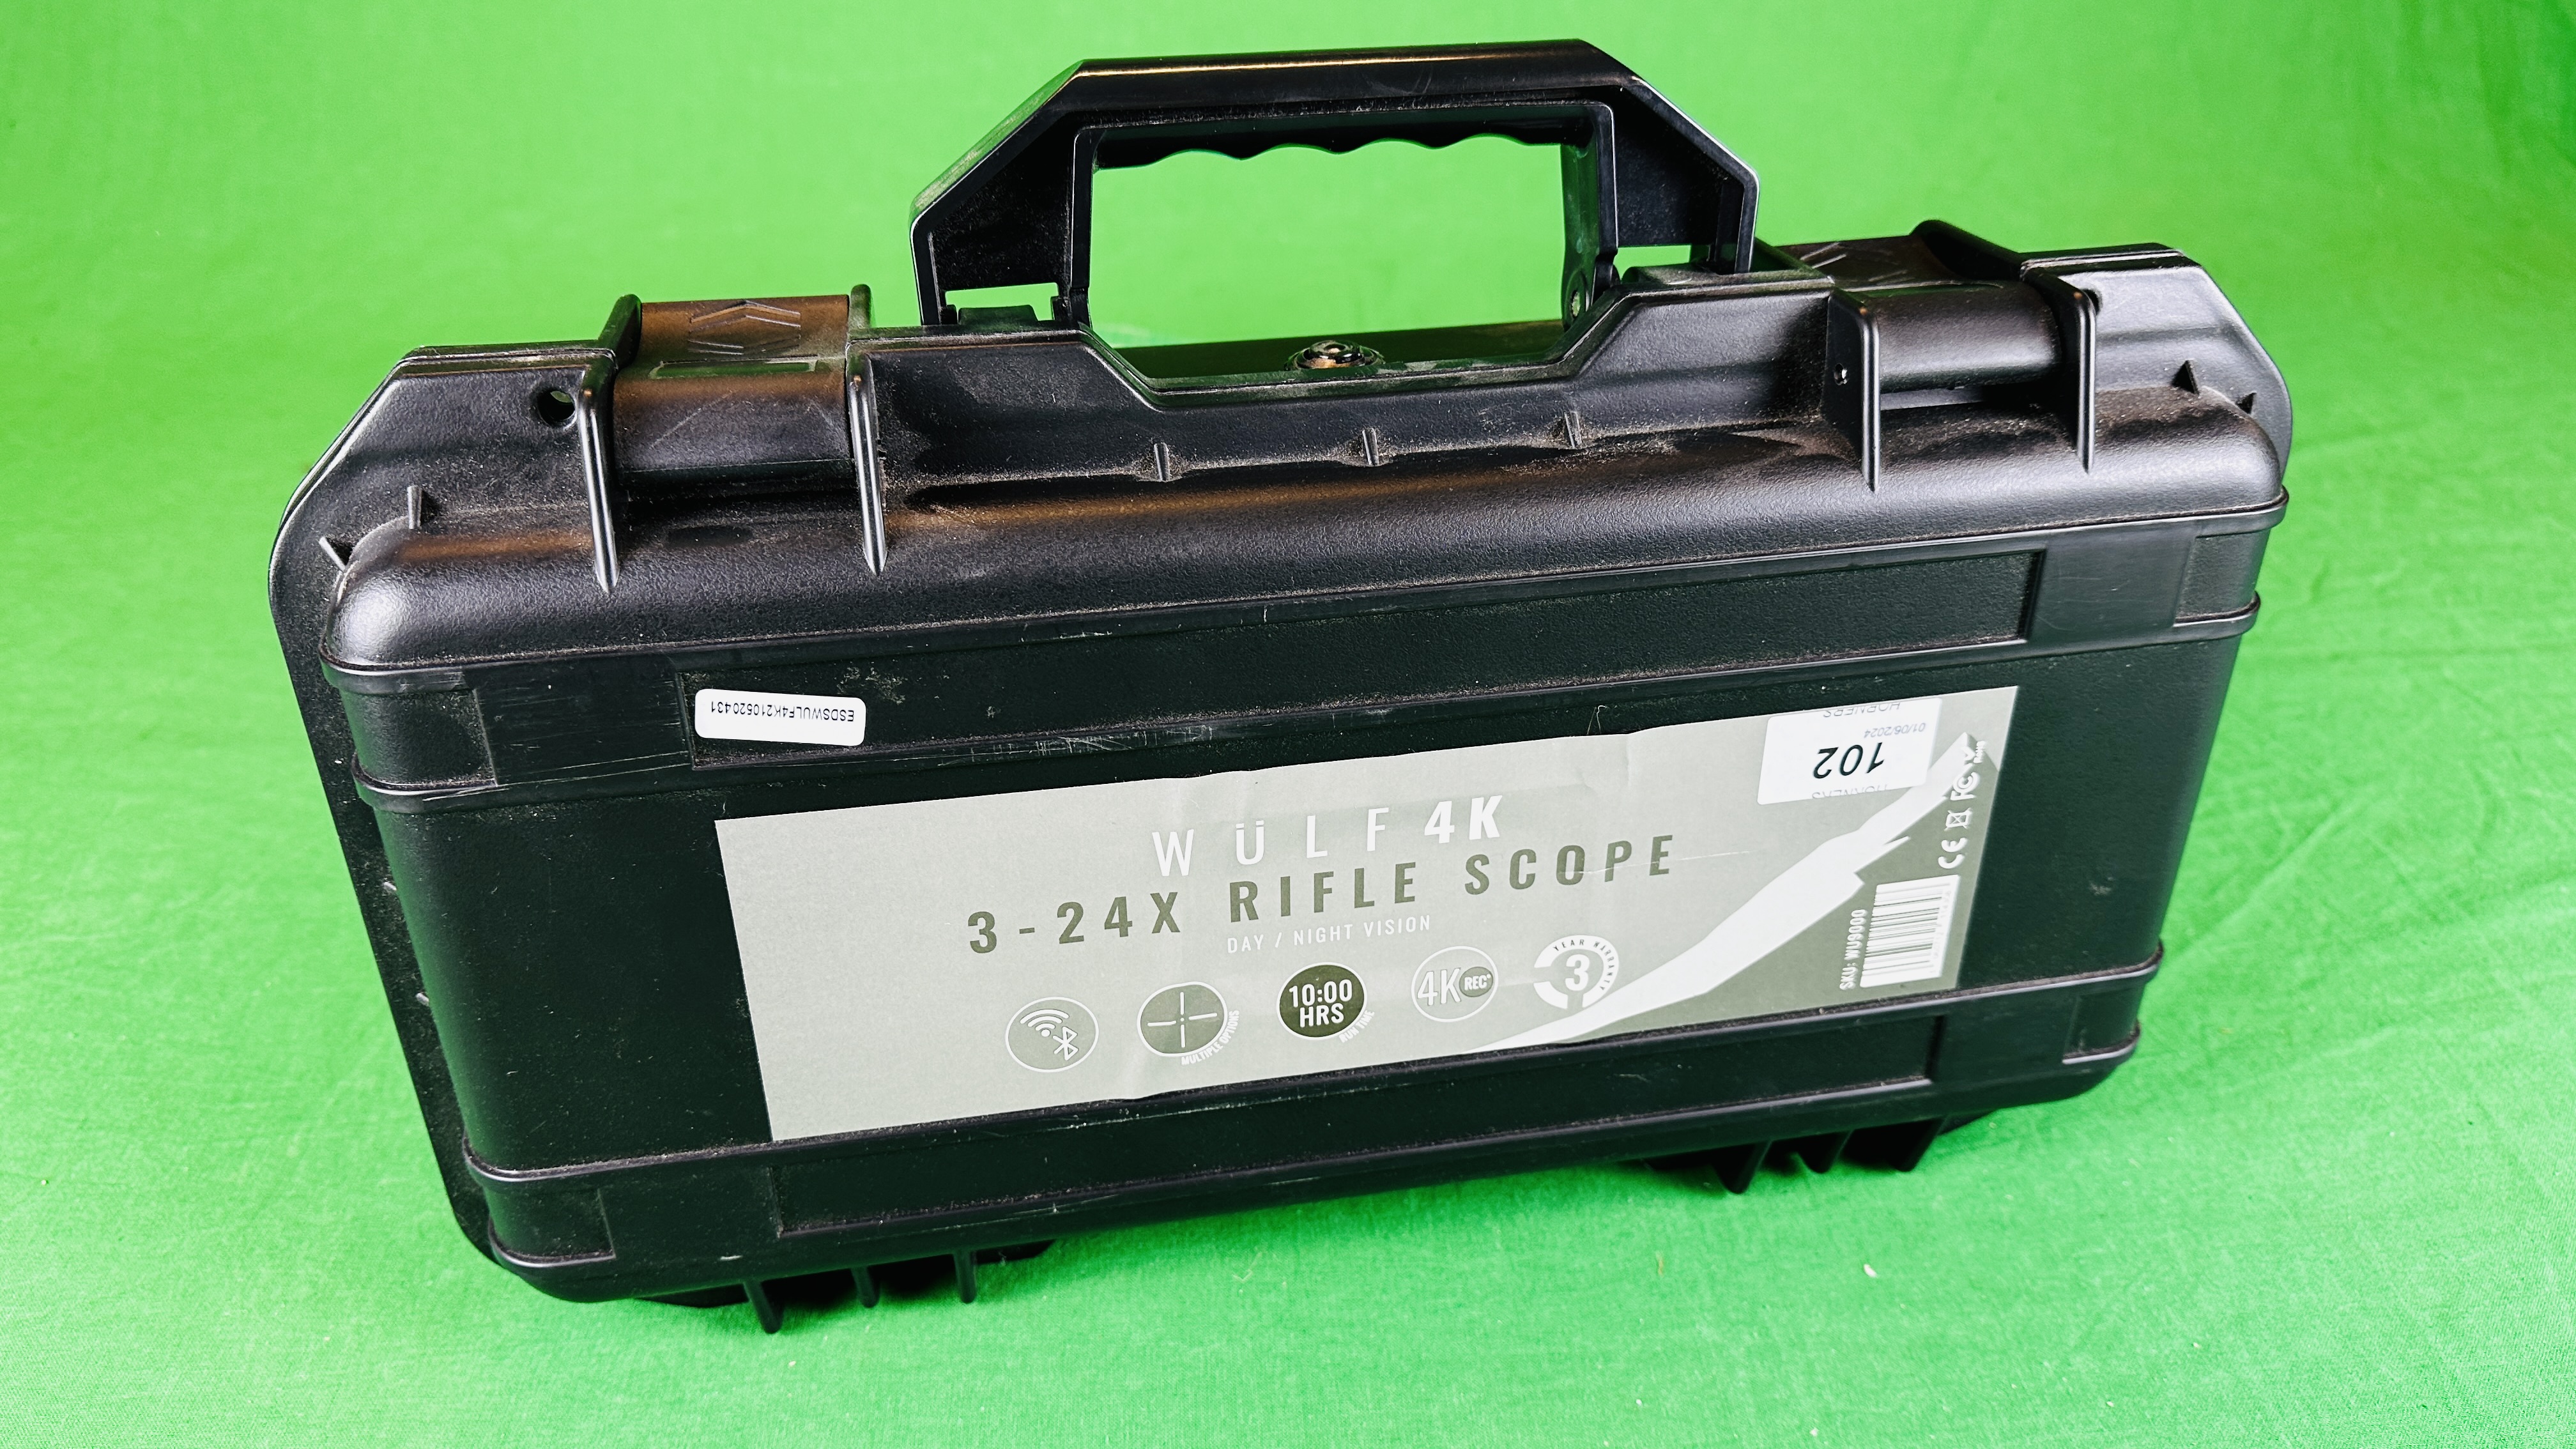 WULF 3-24X DAY/NIGHT VISION RIFLE SCOPE IN HARD SHELL CARRY CASE WITH ACCESSORIES. - Image 24 of 24